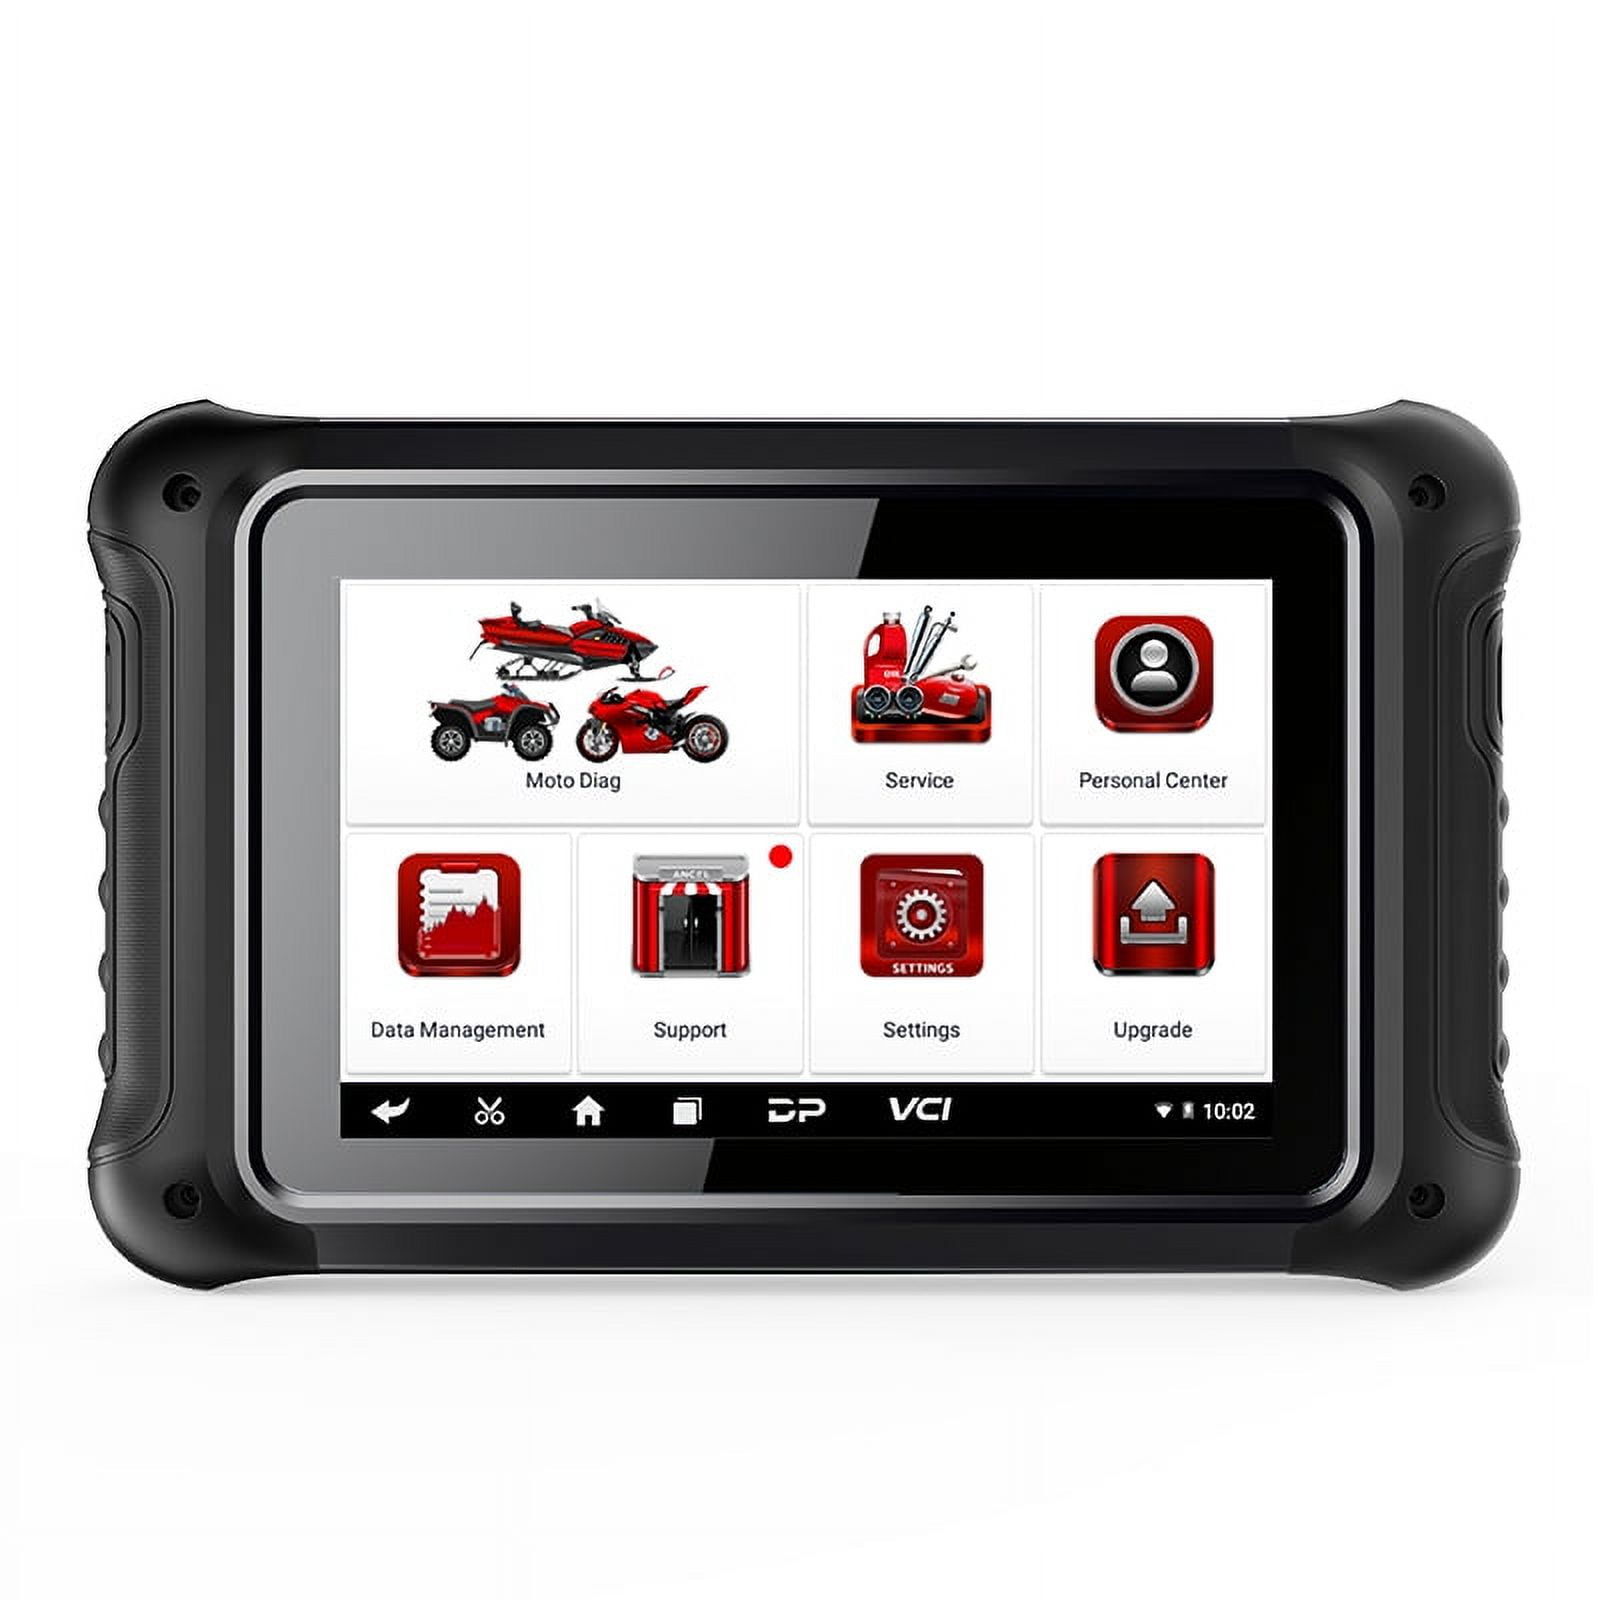 ANCEL MT700 Motorcycle Full Systems Diagnostic Scan Tool Motorbike